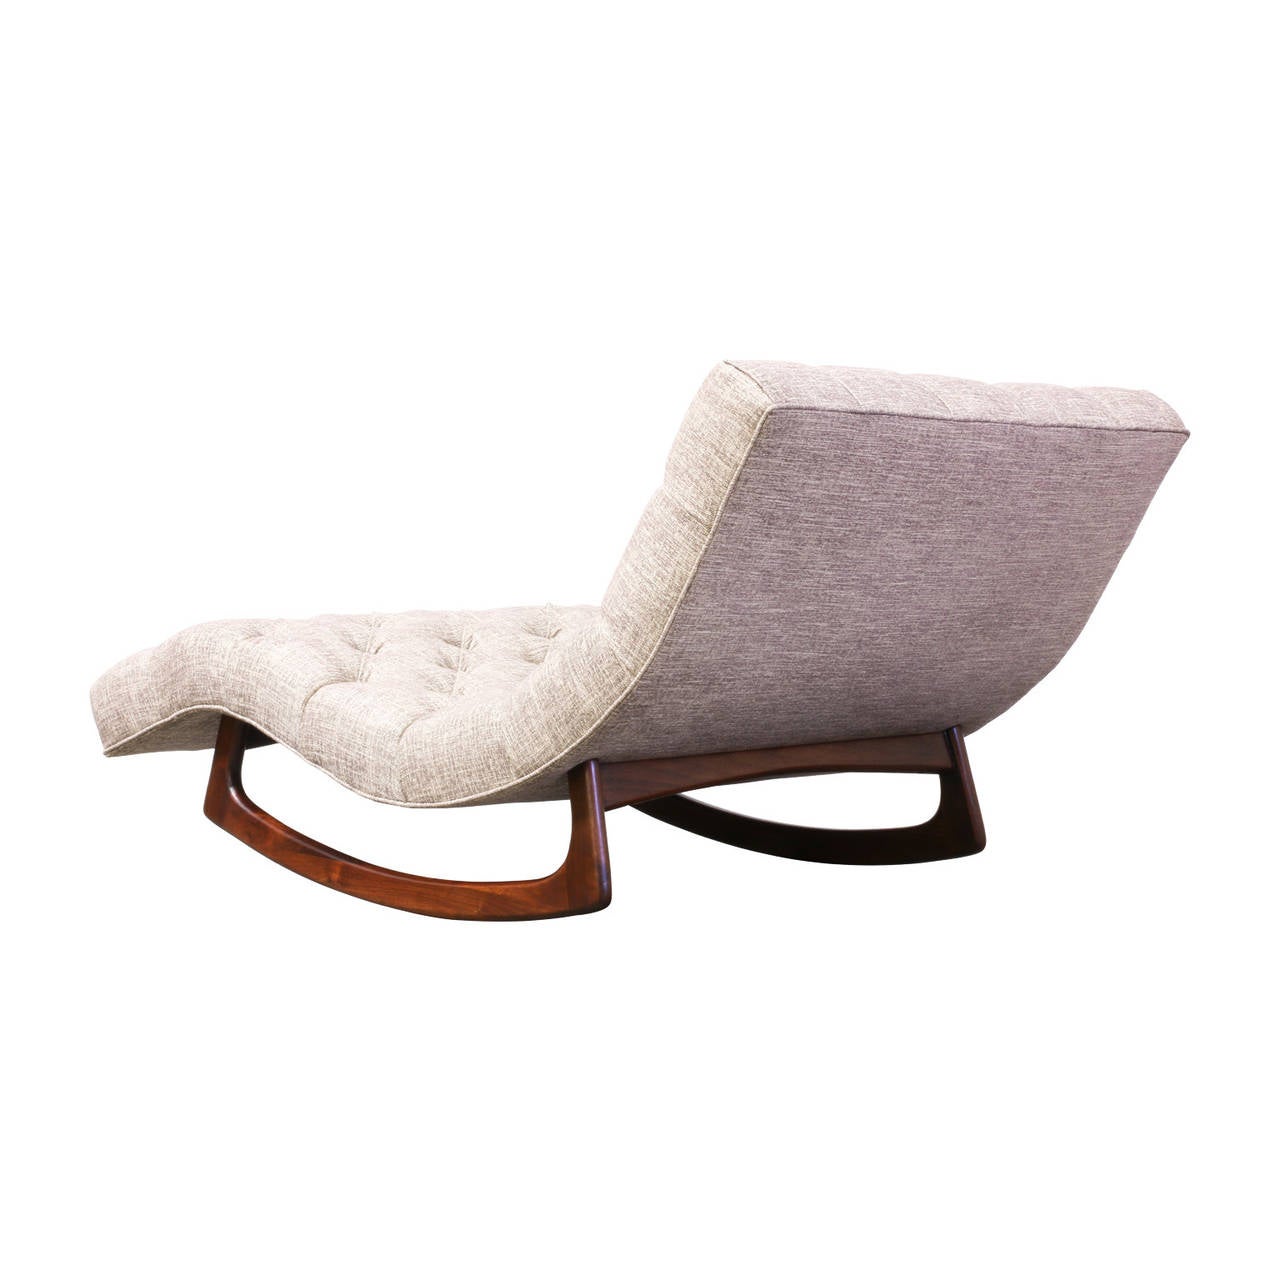 American Adrian Pearsall Chaise Longue for Craft Associates